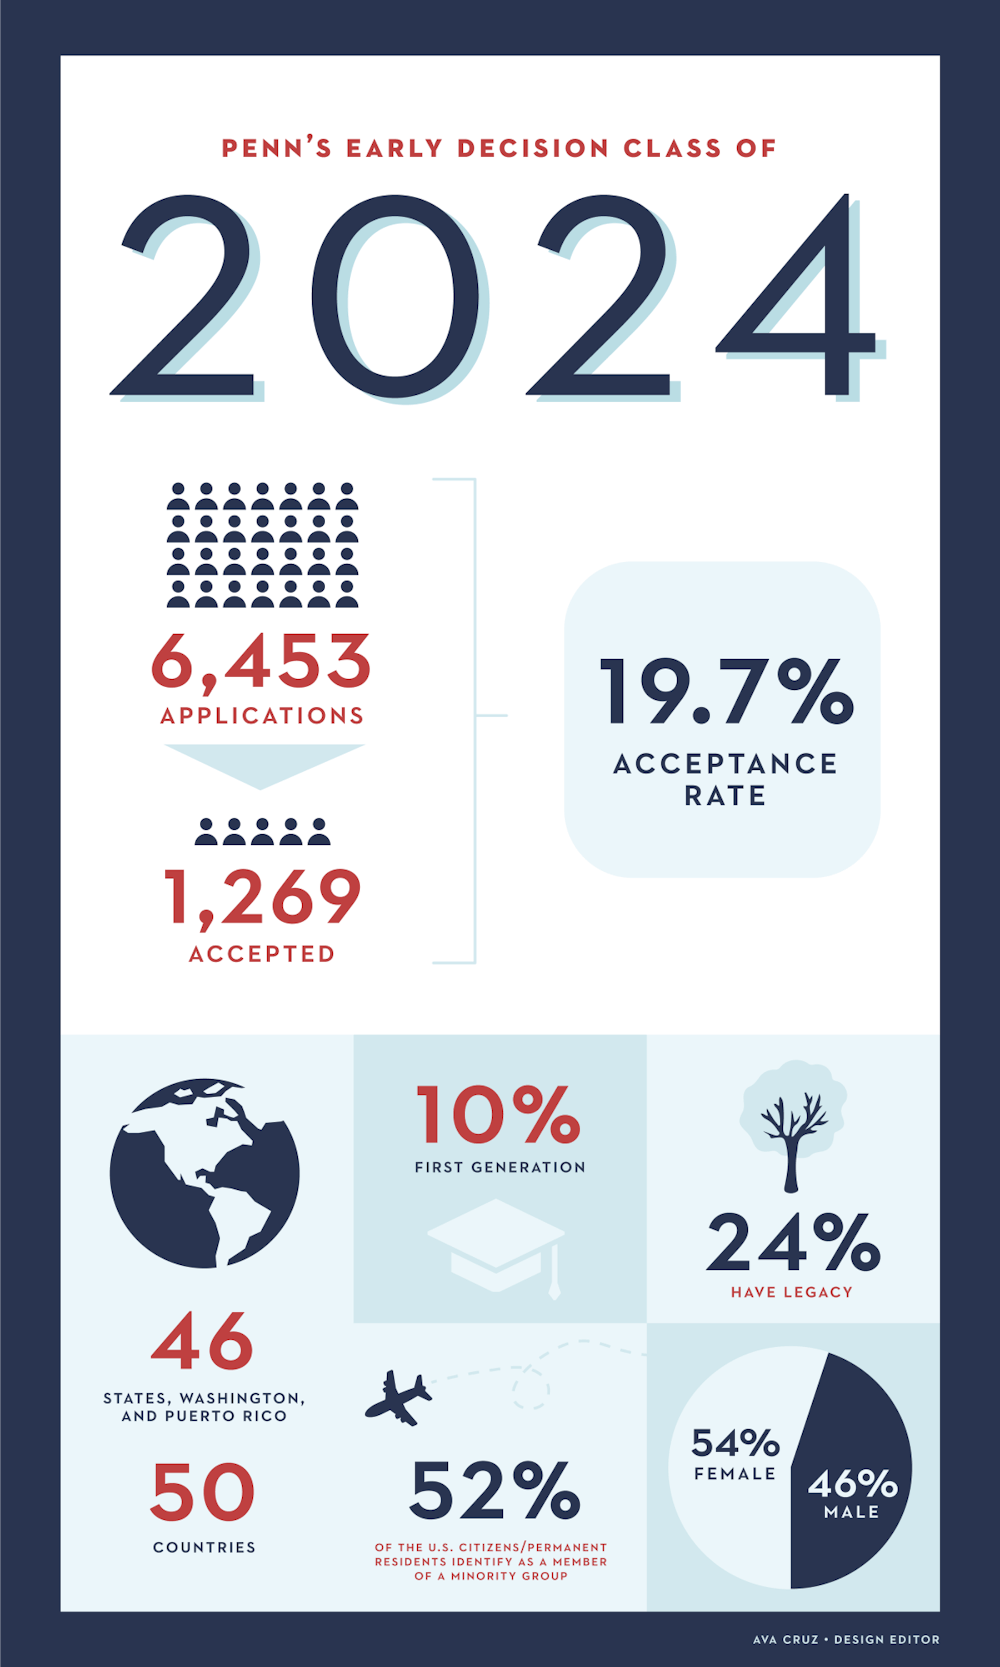 Penn's early decision acceptance rate increases to 19.7% for Class of 2024  | The Daily Pennsylvanian